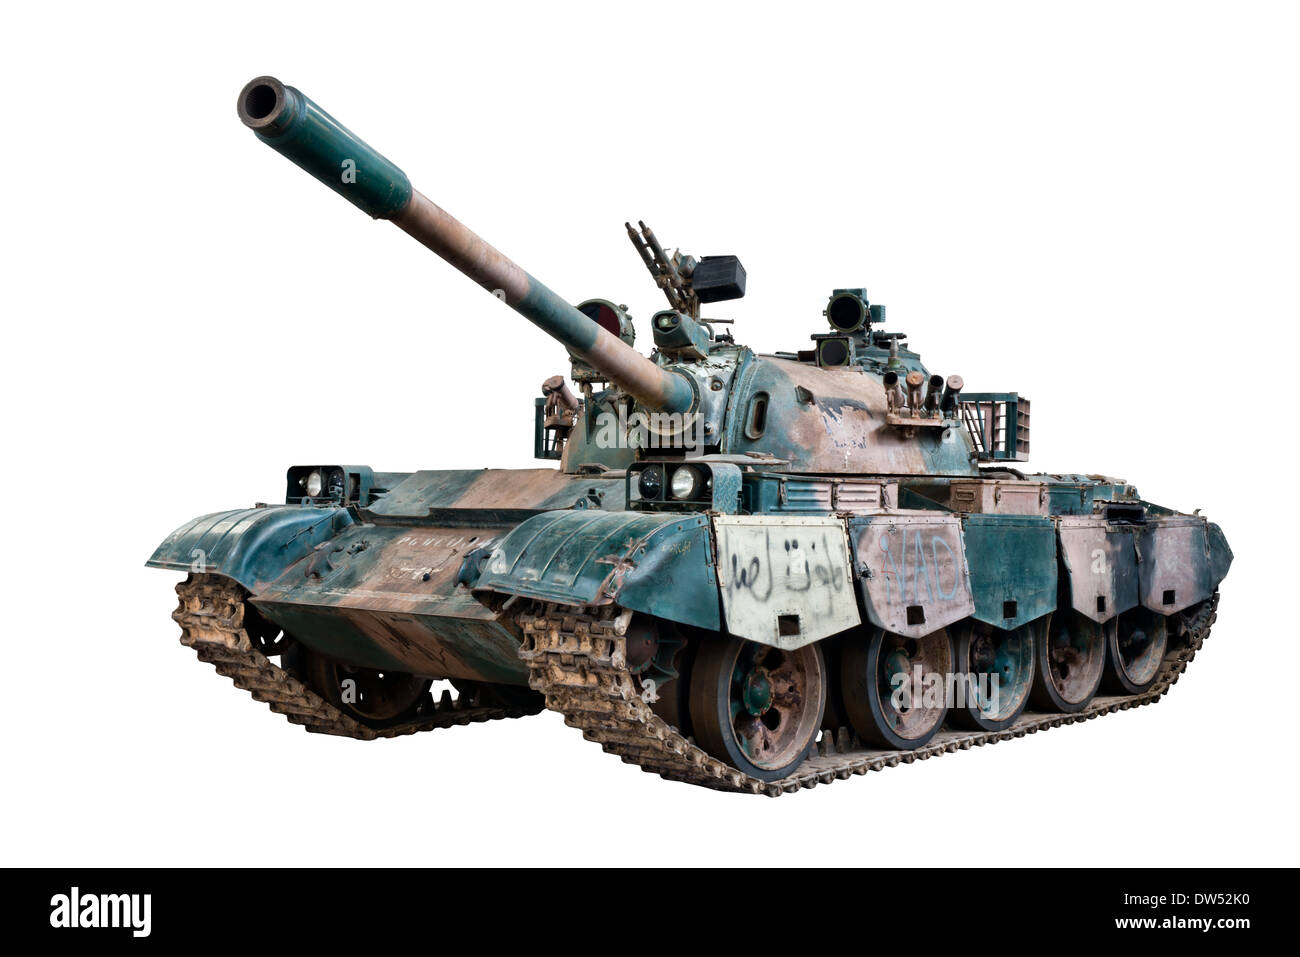 A cut out or a Russian T54/55 main battle Tank used by the Soviet army & Warsaw pact forces during the cold war period Stock Photo